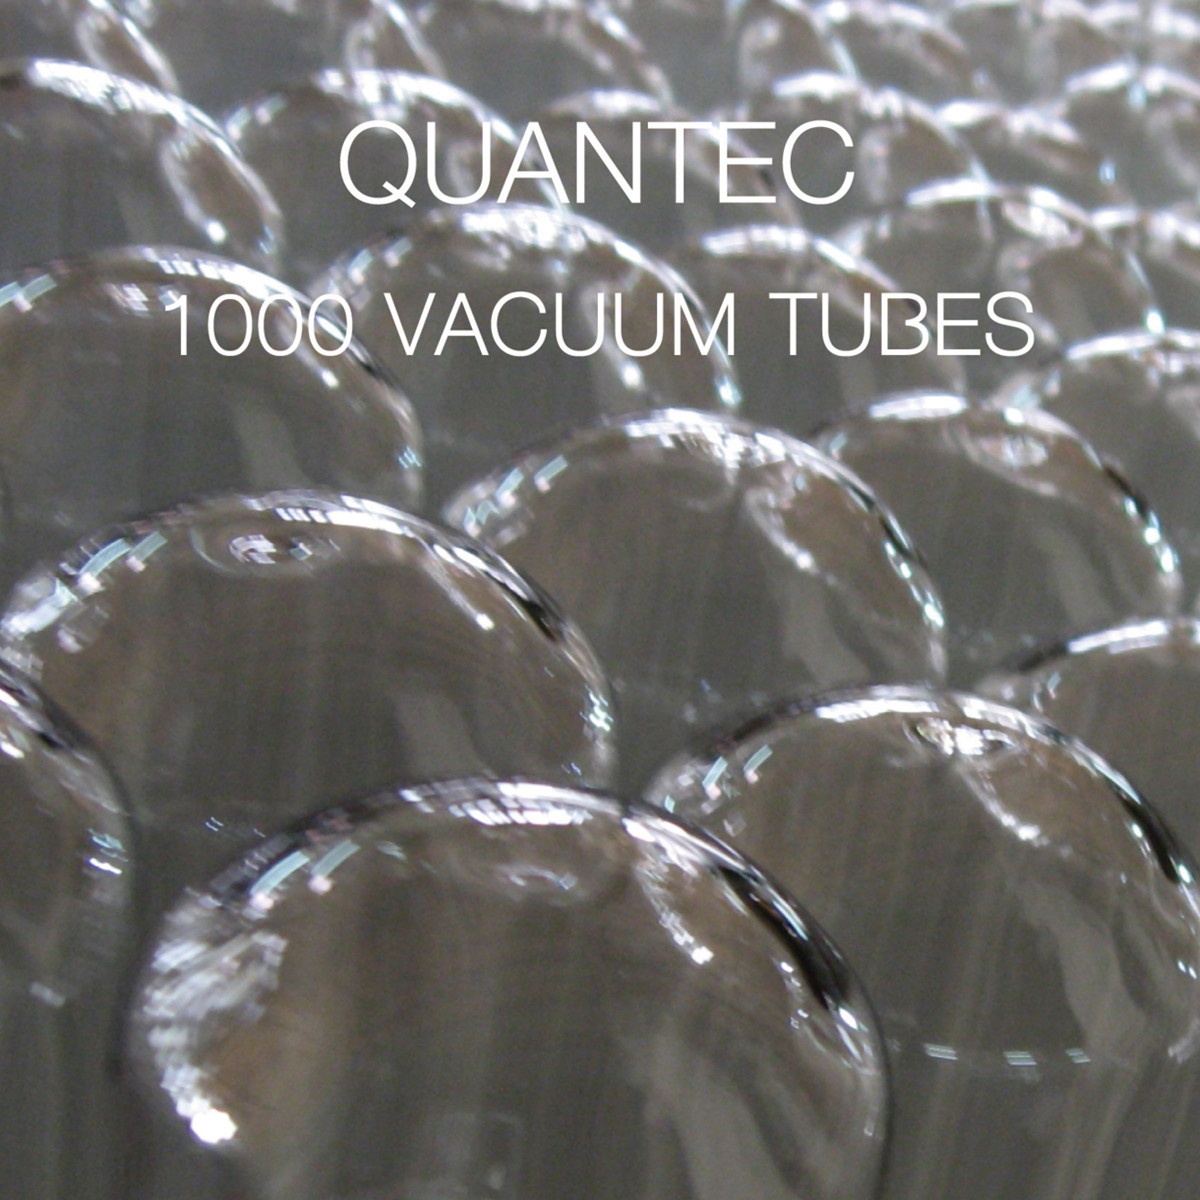 1000 Vacuum Tubes - Live Extract